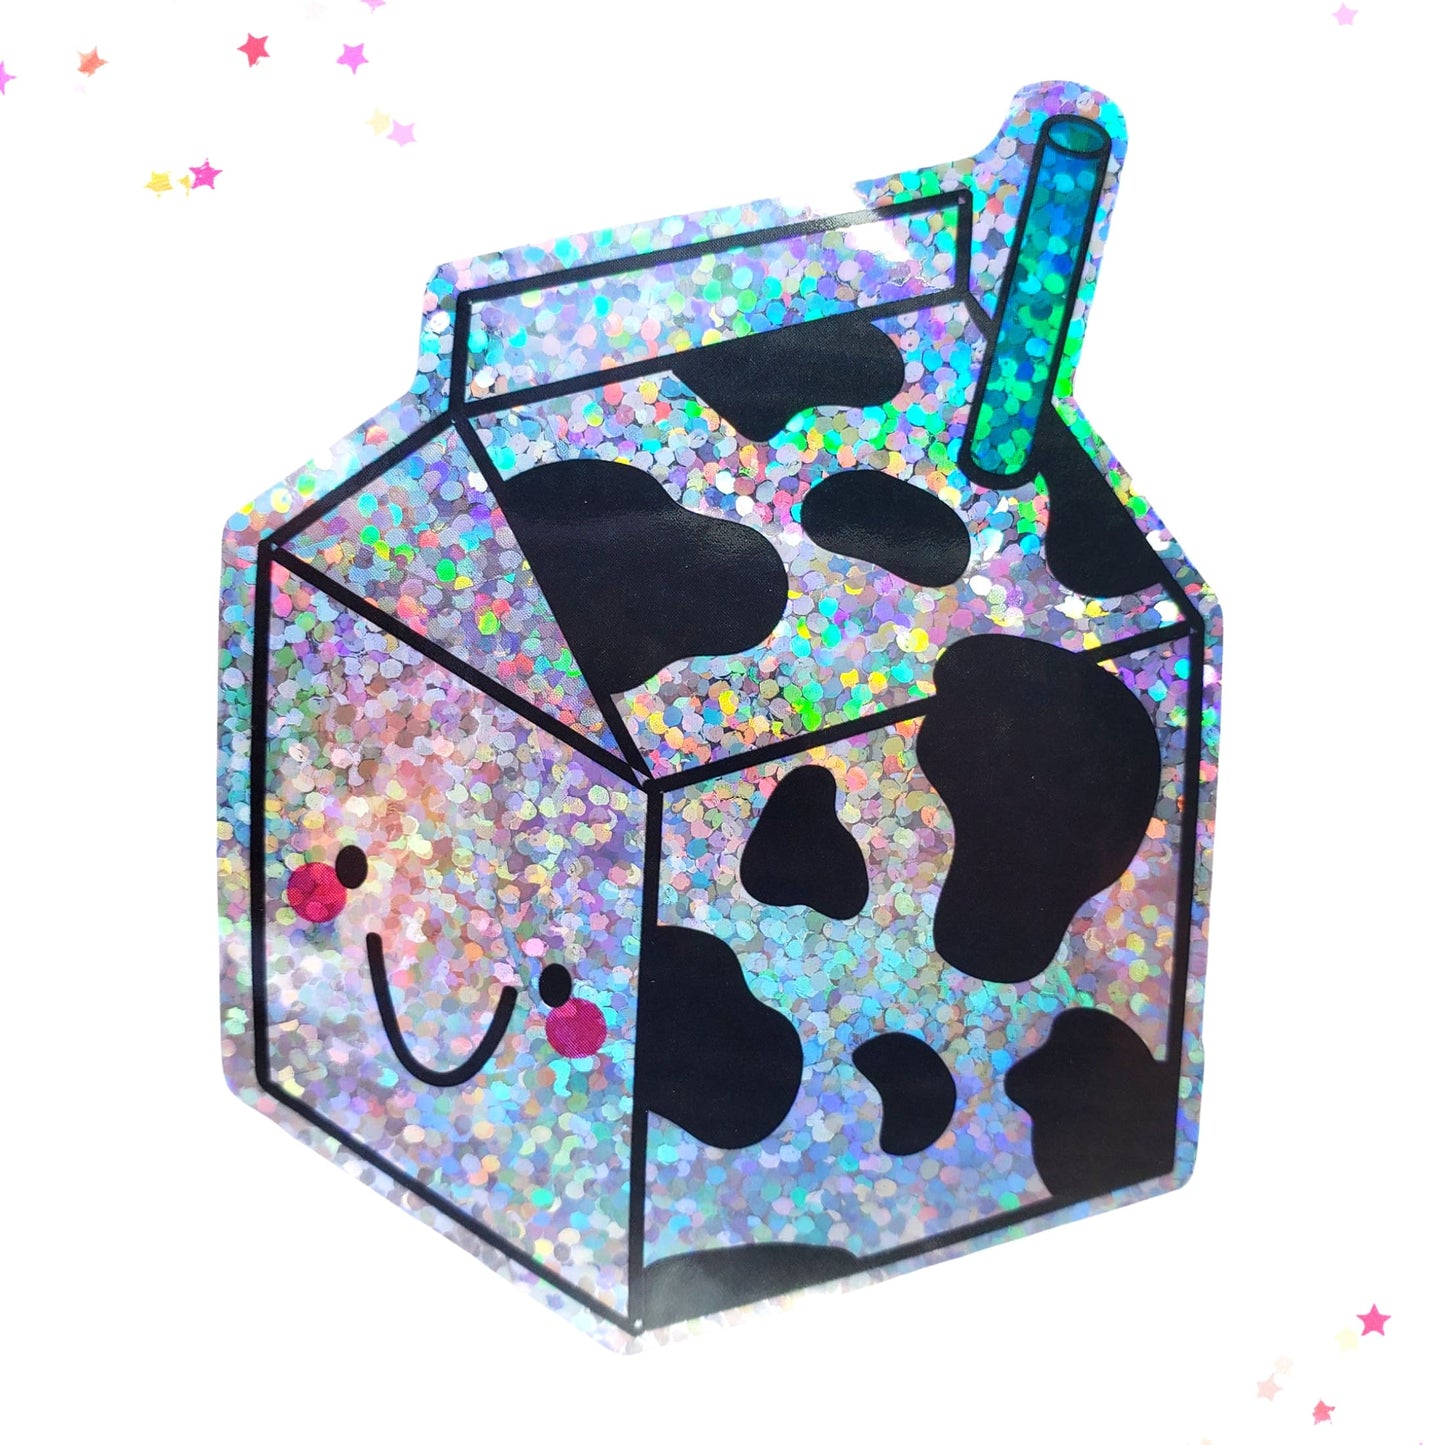 Premium Sticker - Sparkly Holographic Glitter Kawaii Milk Carton from Confetti Kitty, Only 2.00